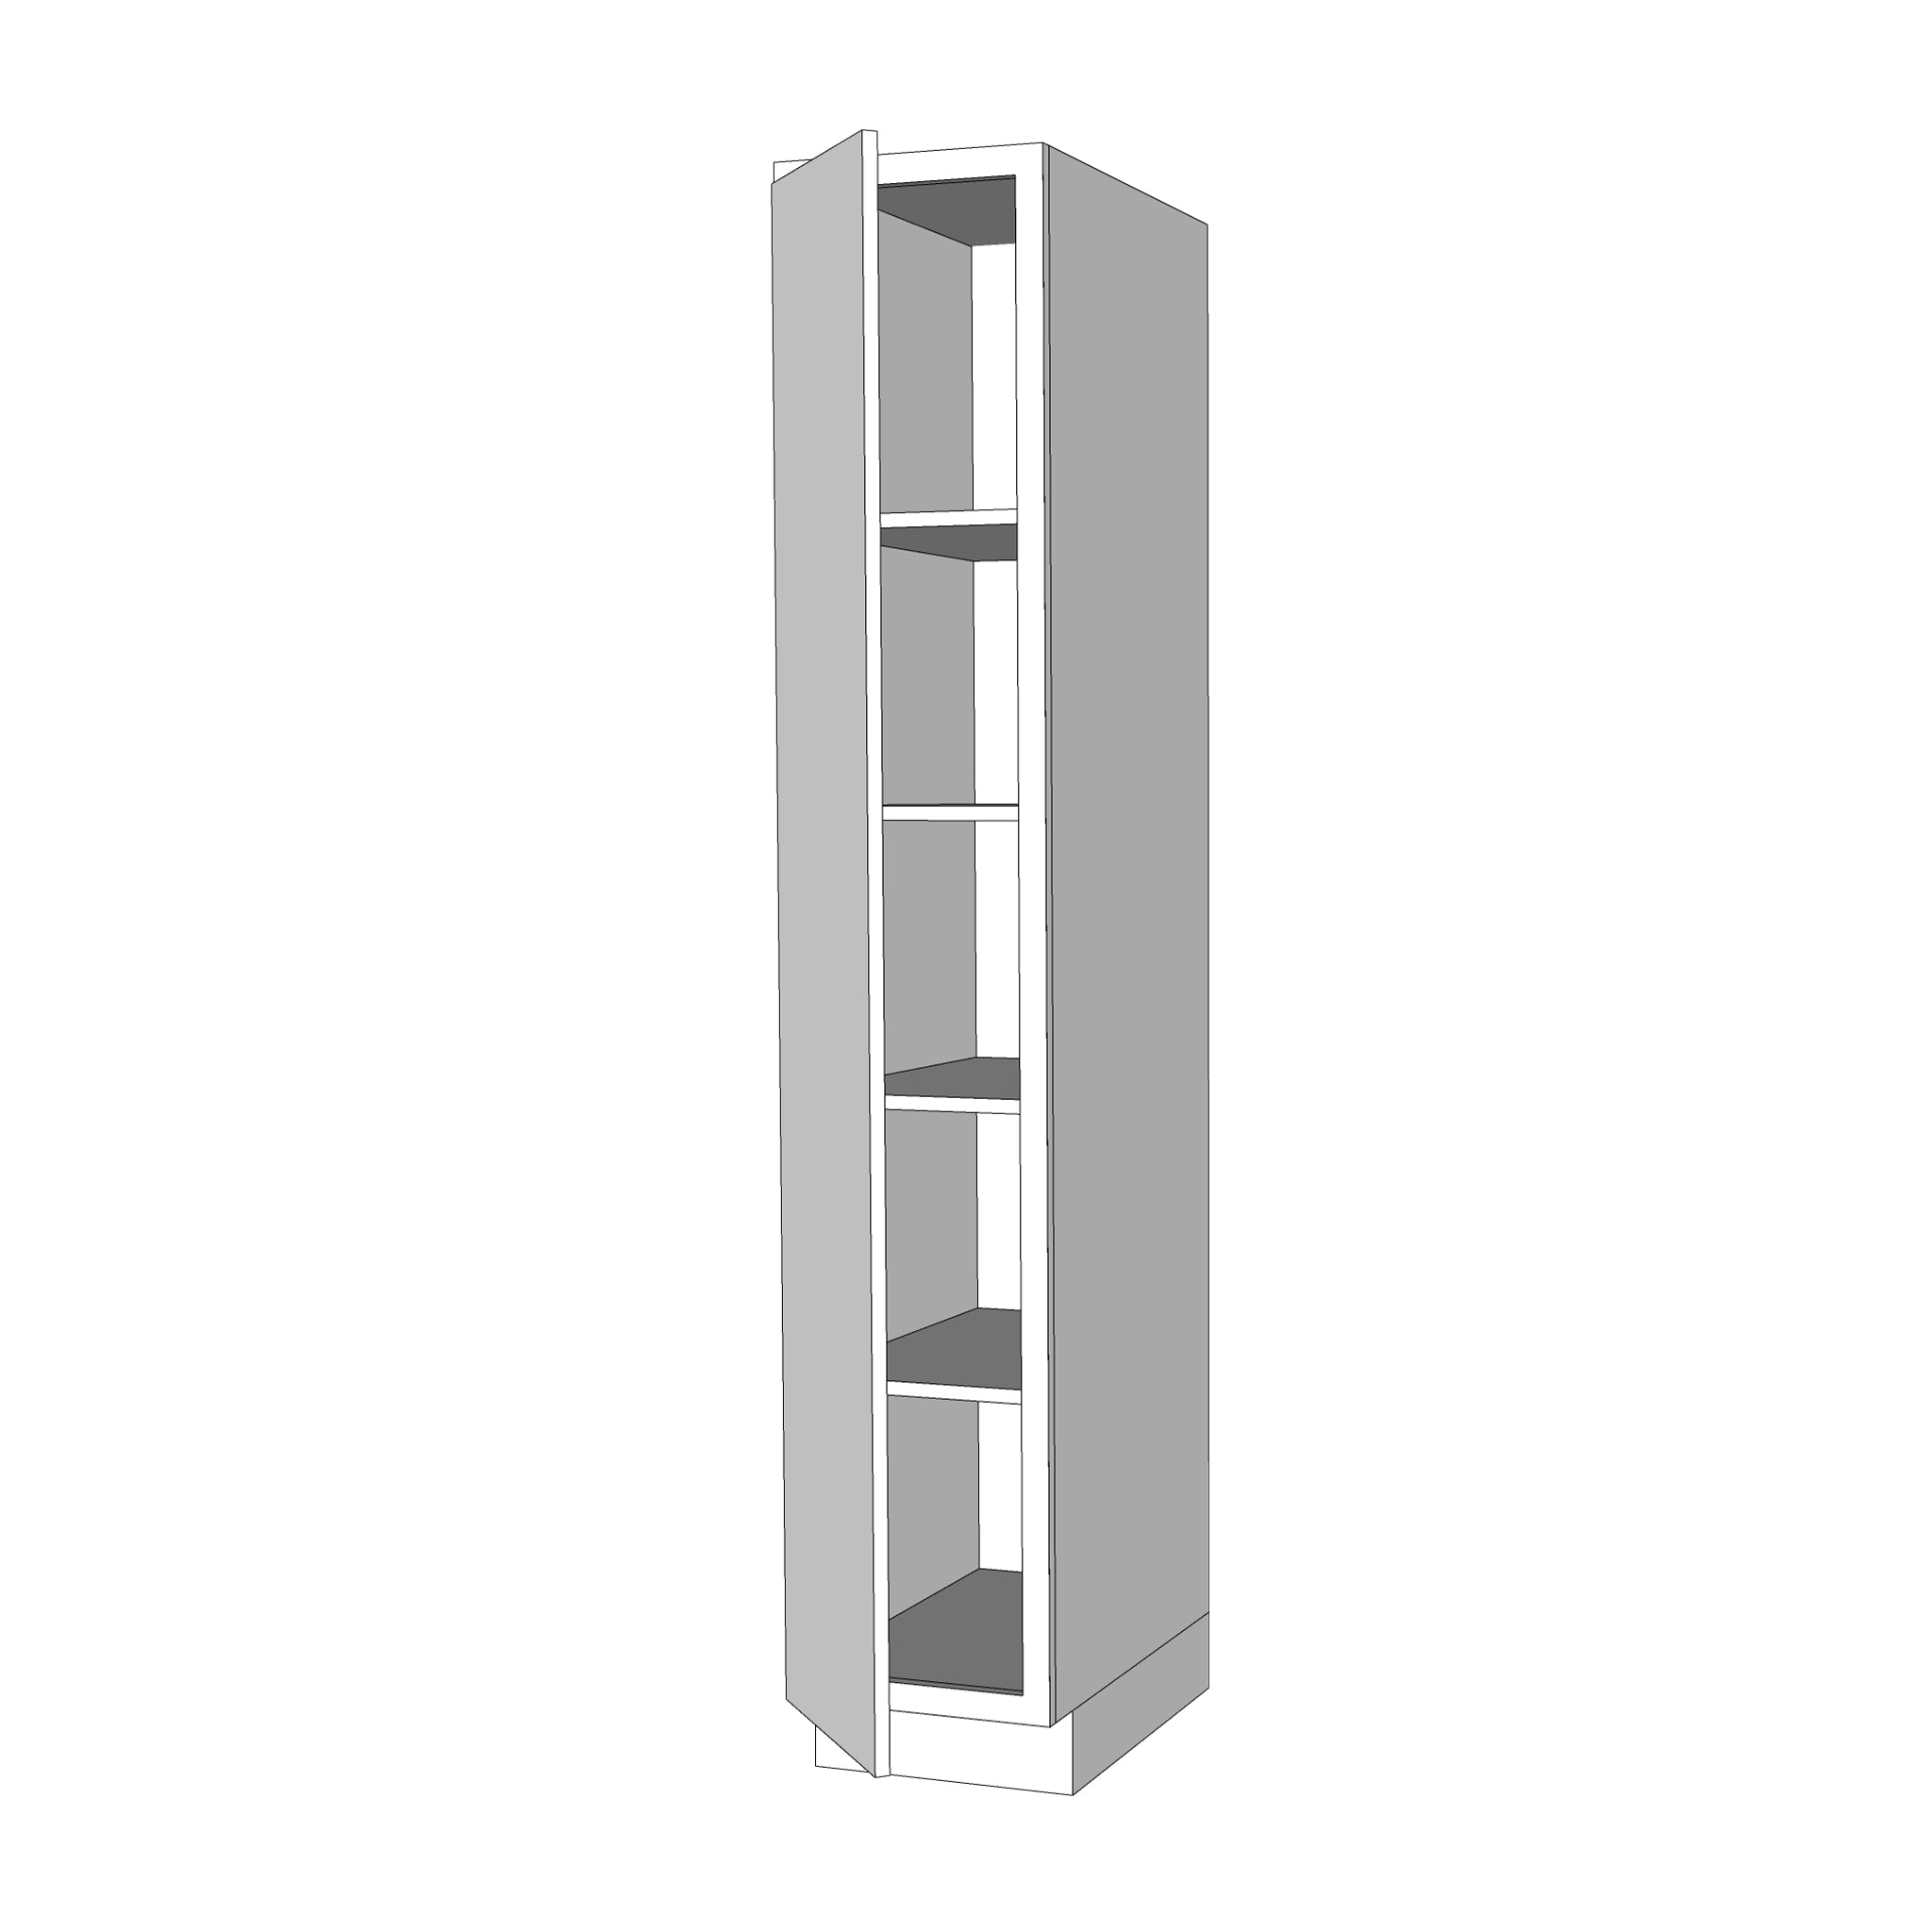 21x84 High Pantry Cabinet - Assembled